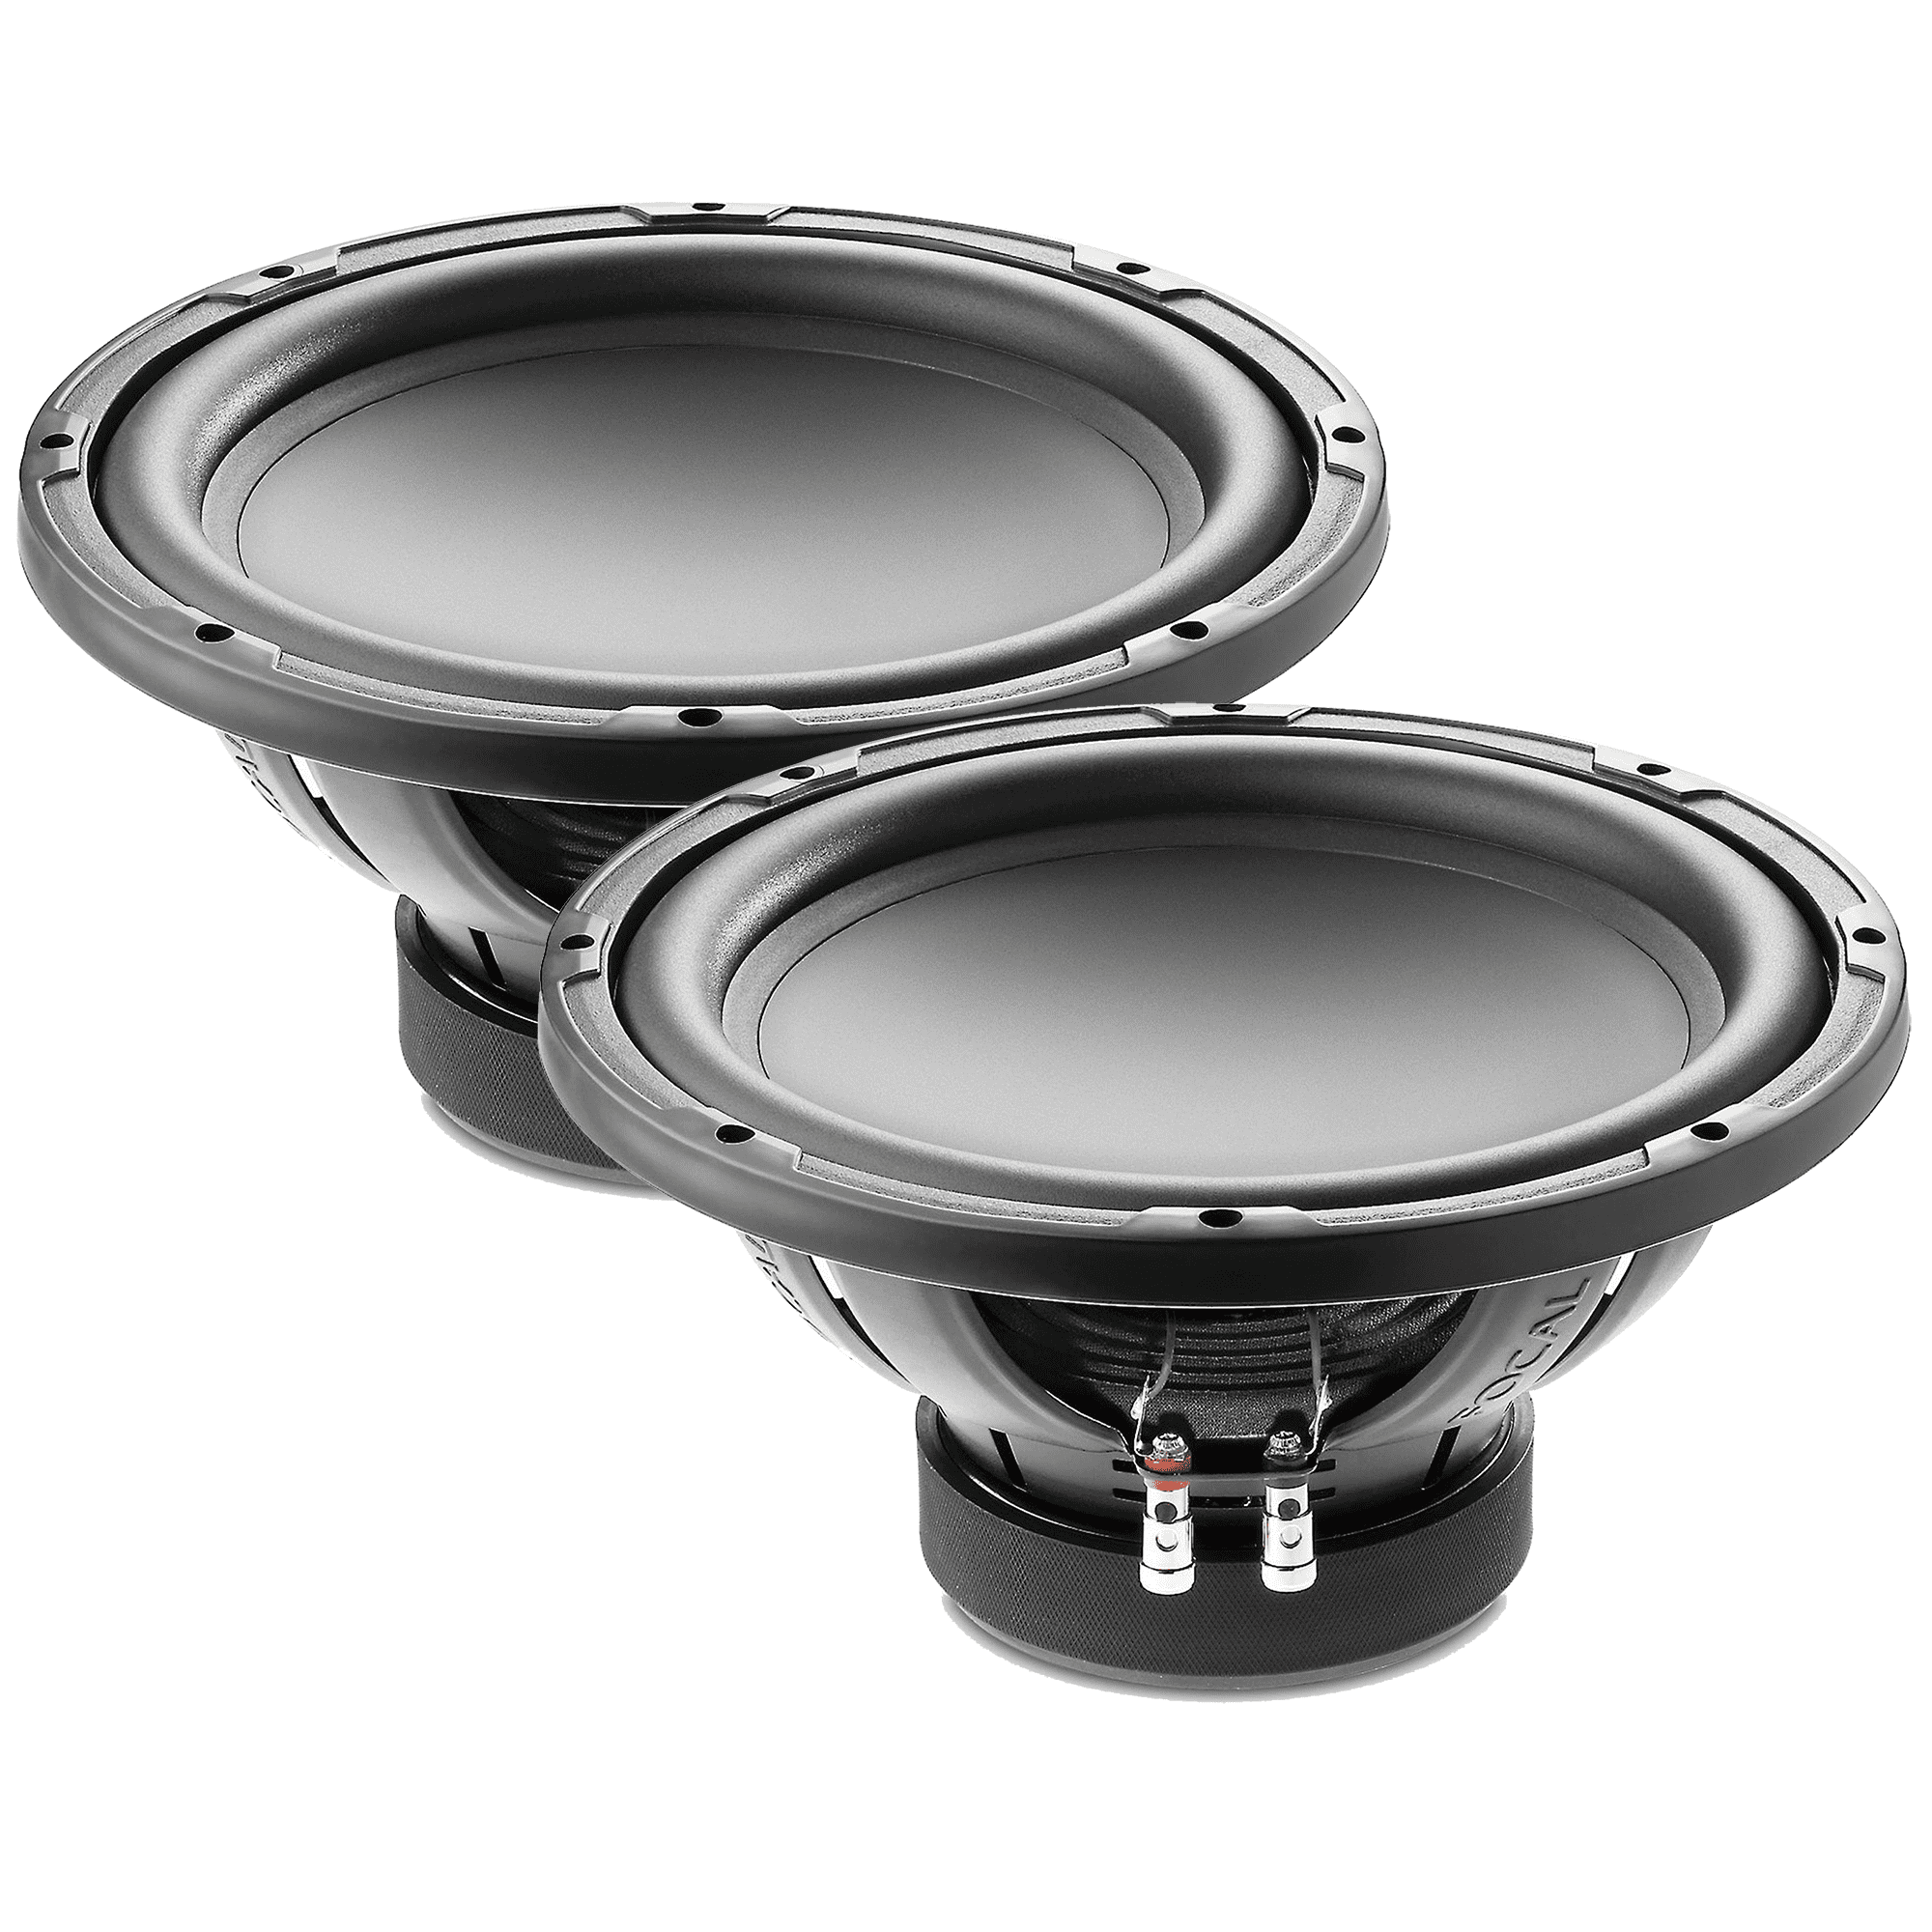 Focal SUBP30 Performance Car Stereo 12" 600 Watts Single Voice Coil Subwoofer